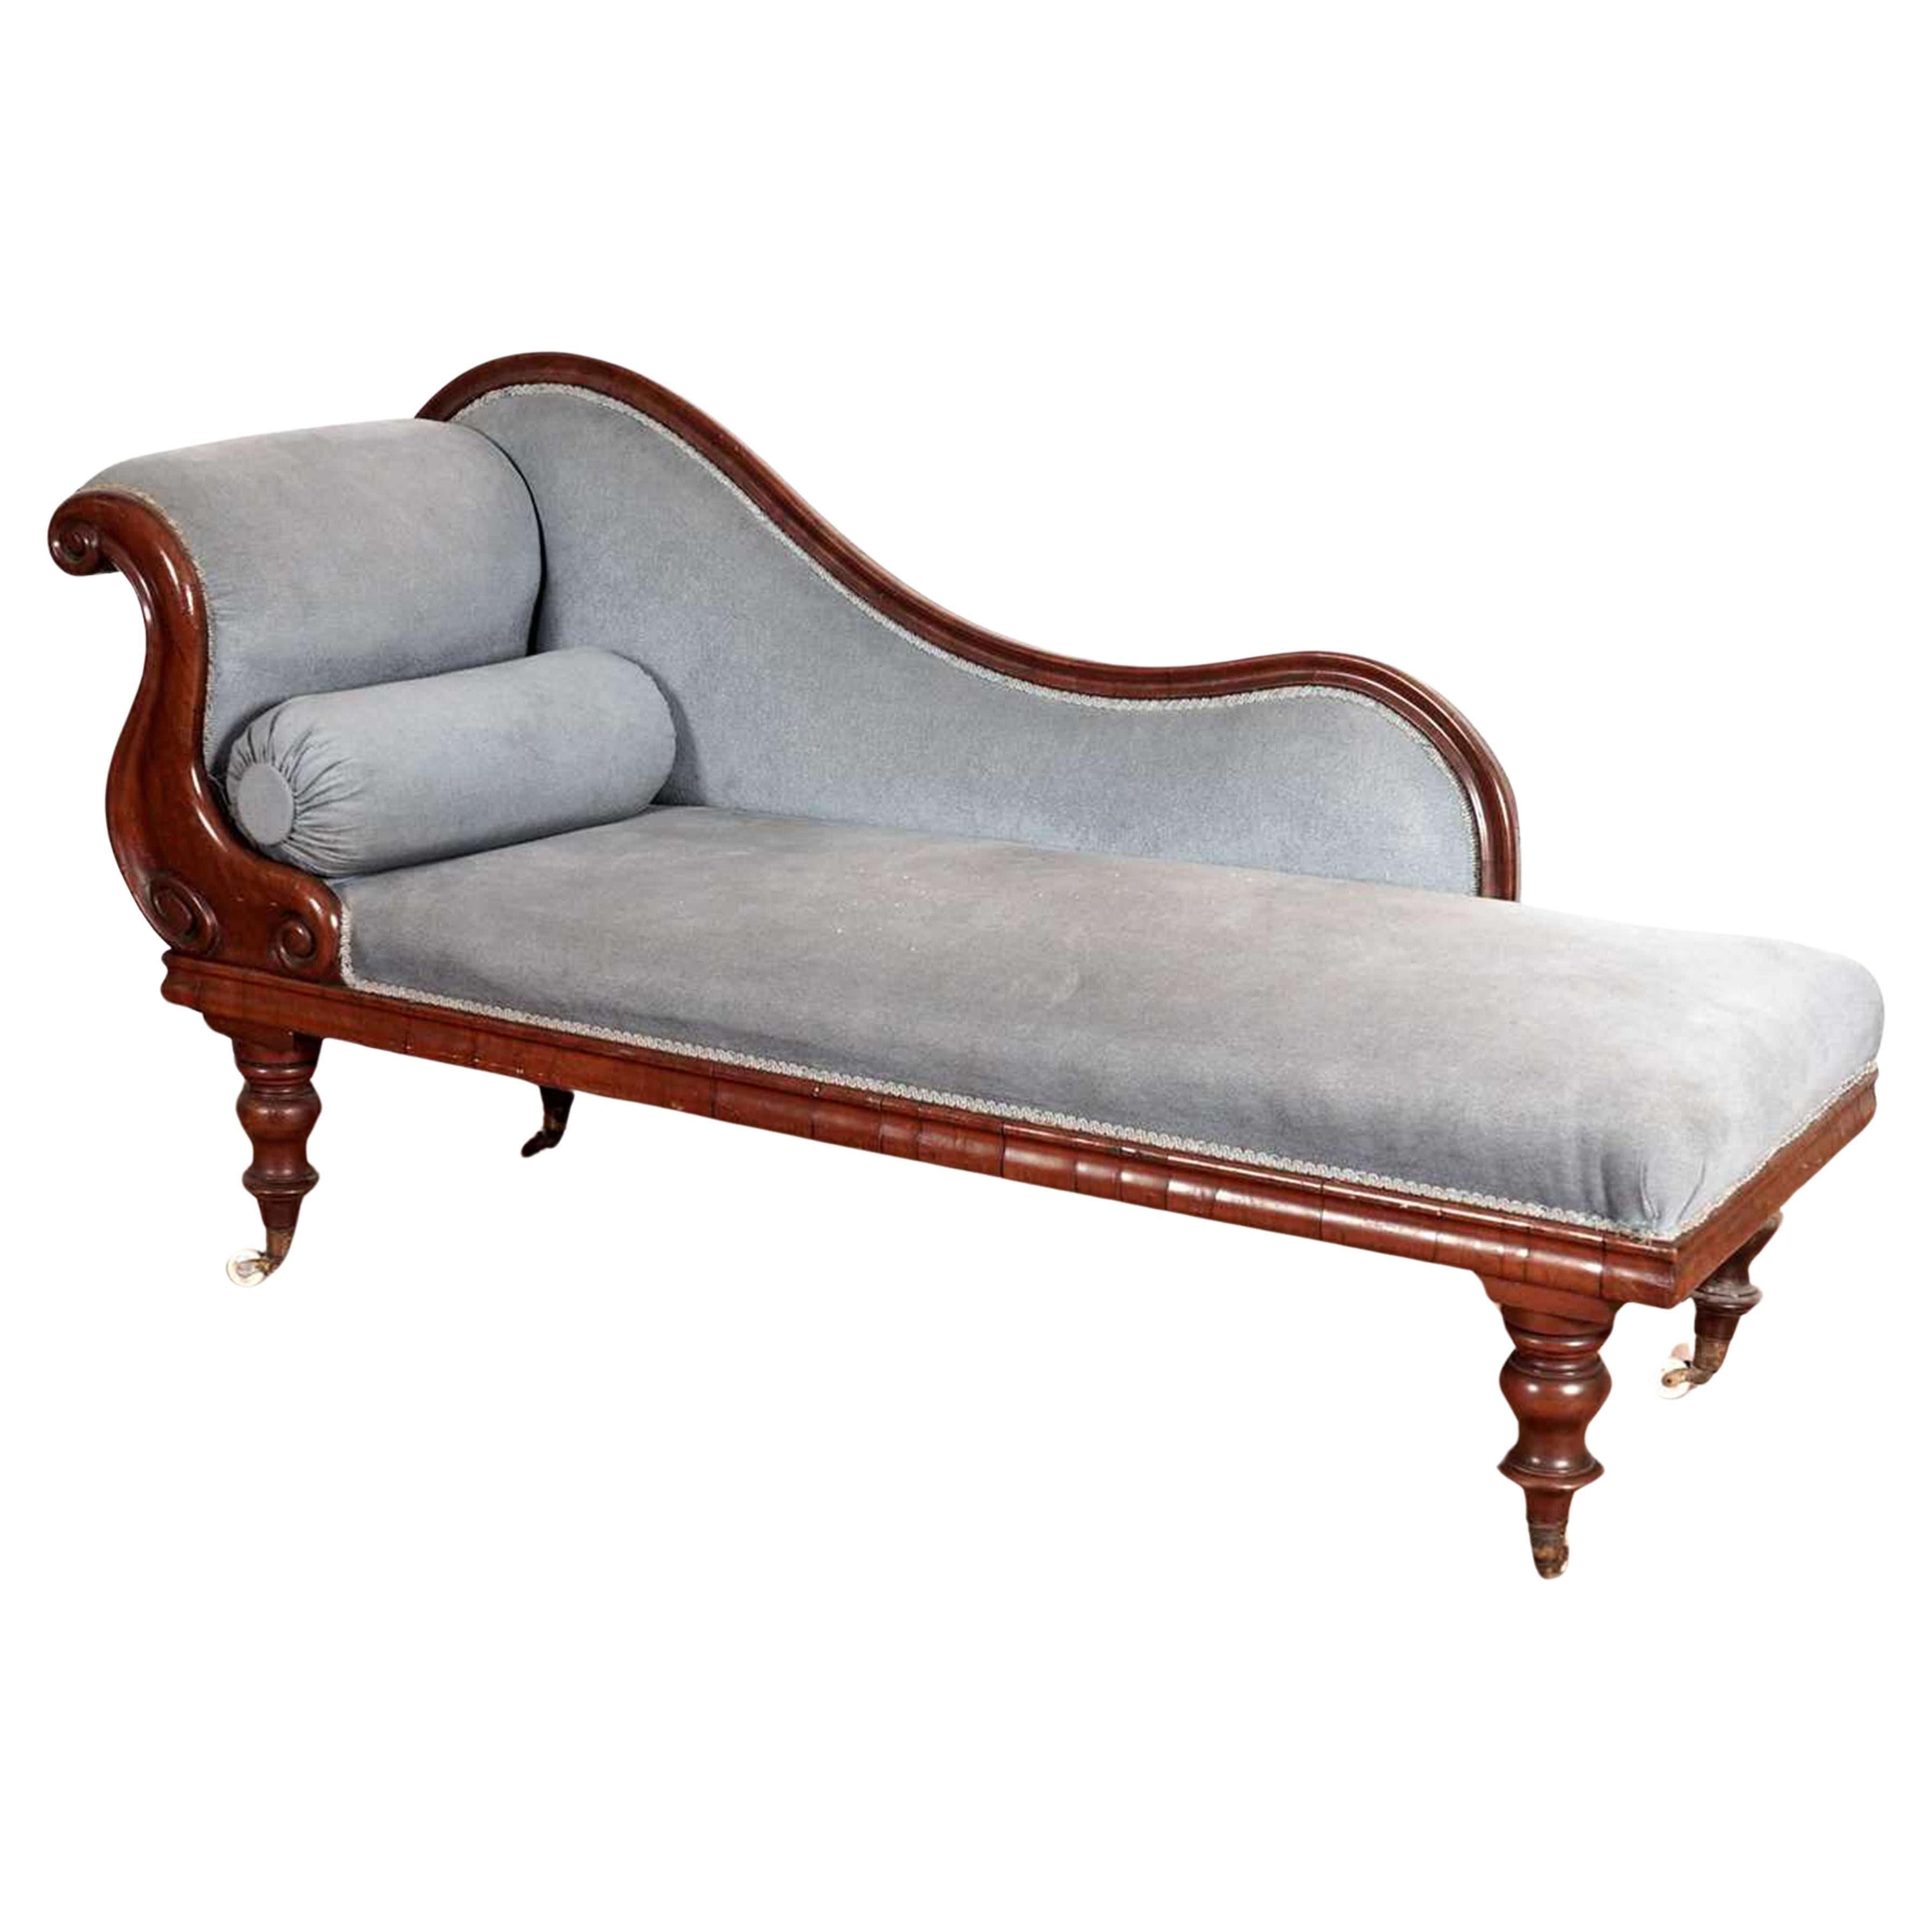 A Victorian Mahogany Swan Back Chaise Longue Upholstered in a Blue Velvet Fabric For Sale